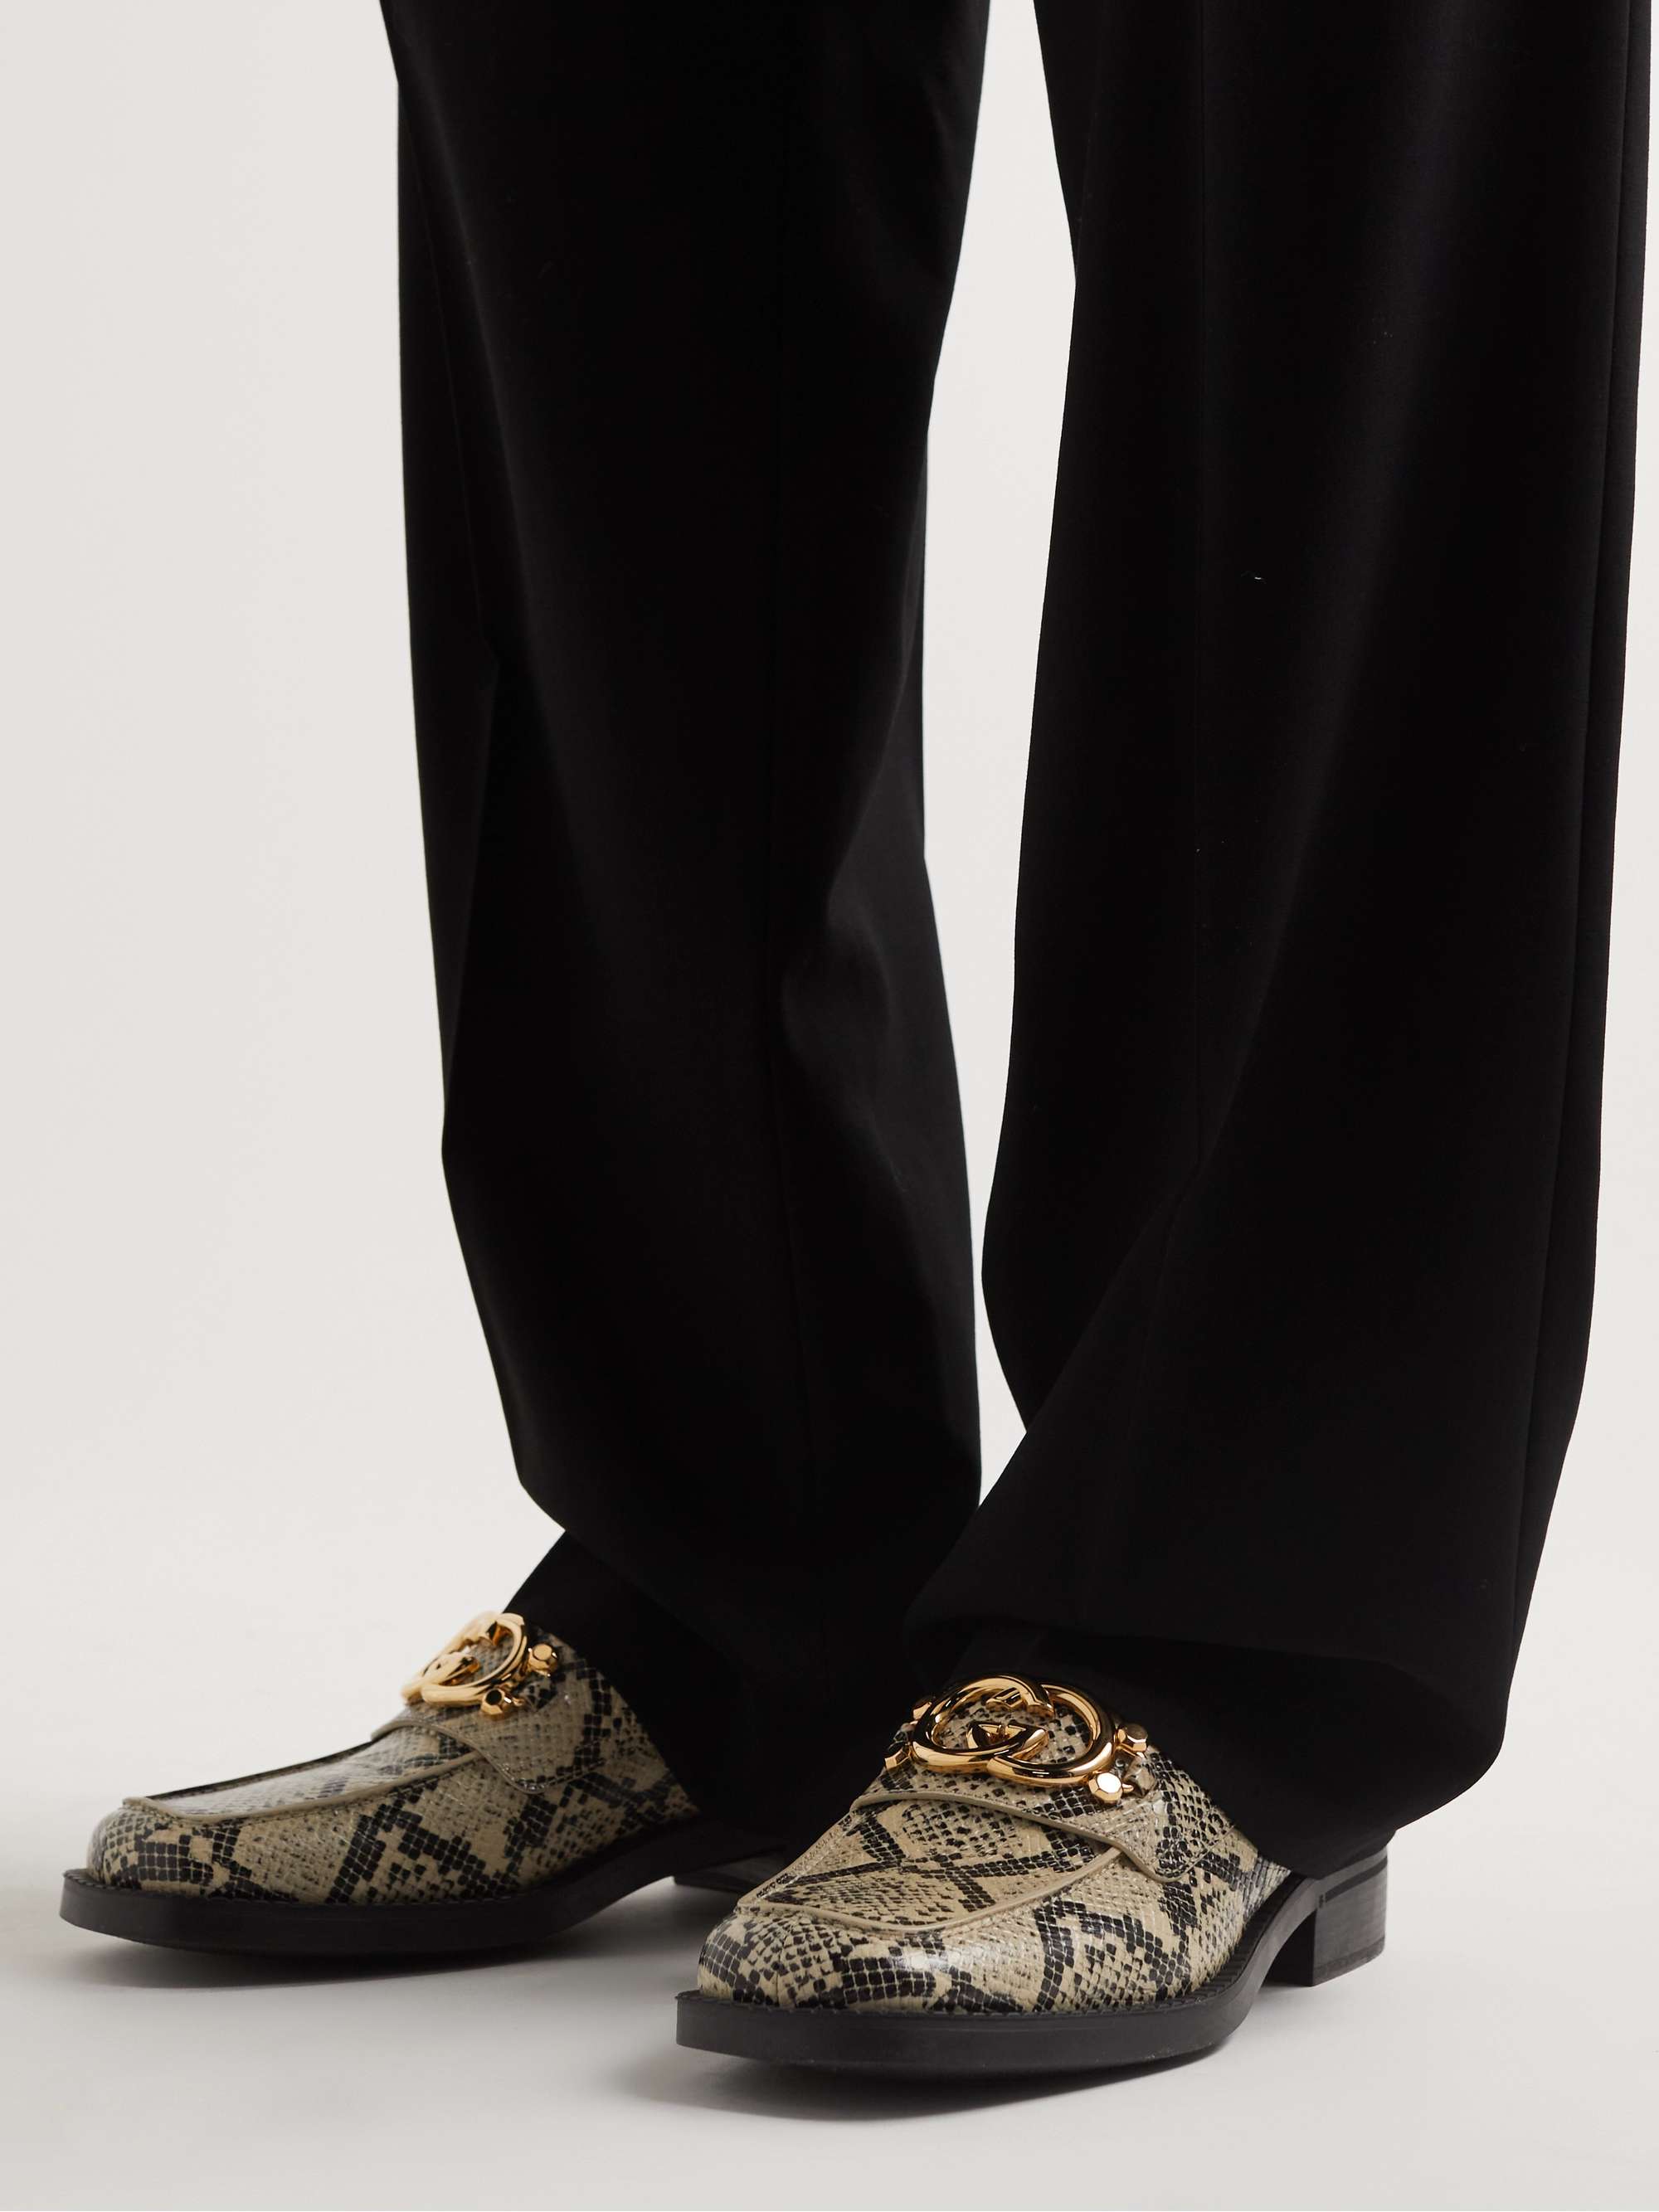 GUCCI Logo-Embellished Croc-Effect Leather Loafers